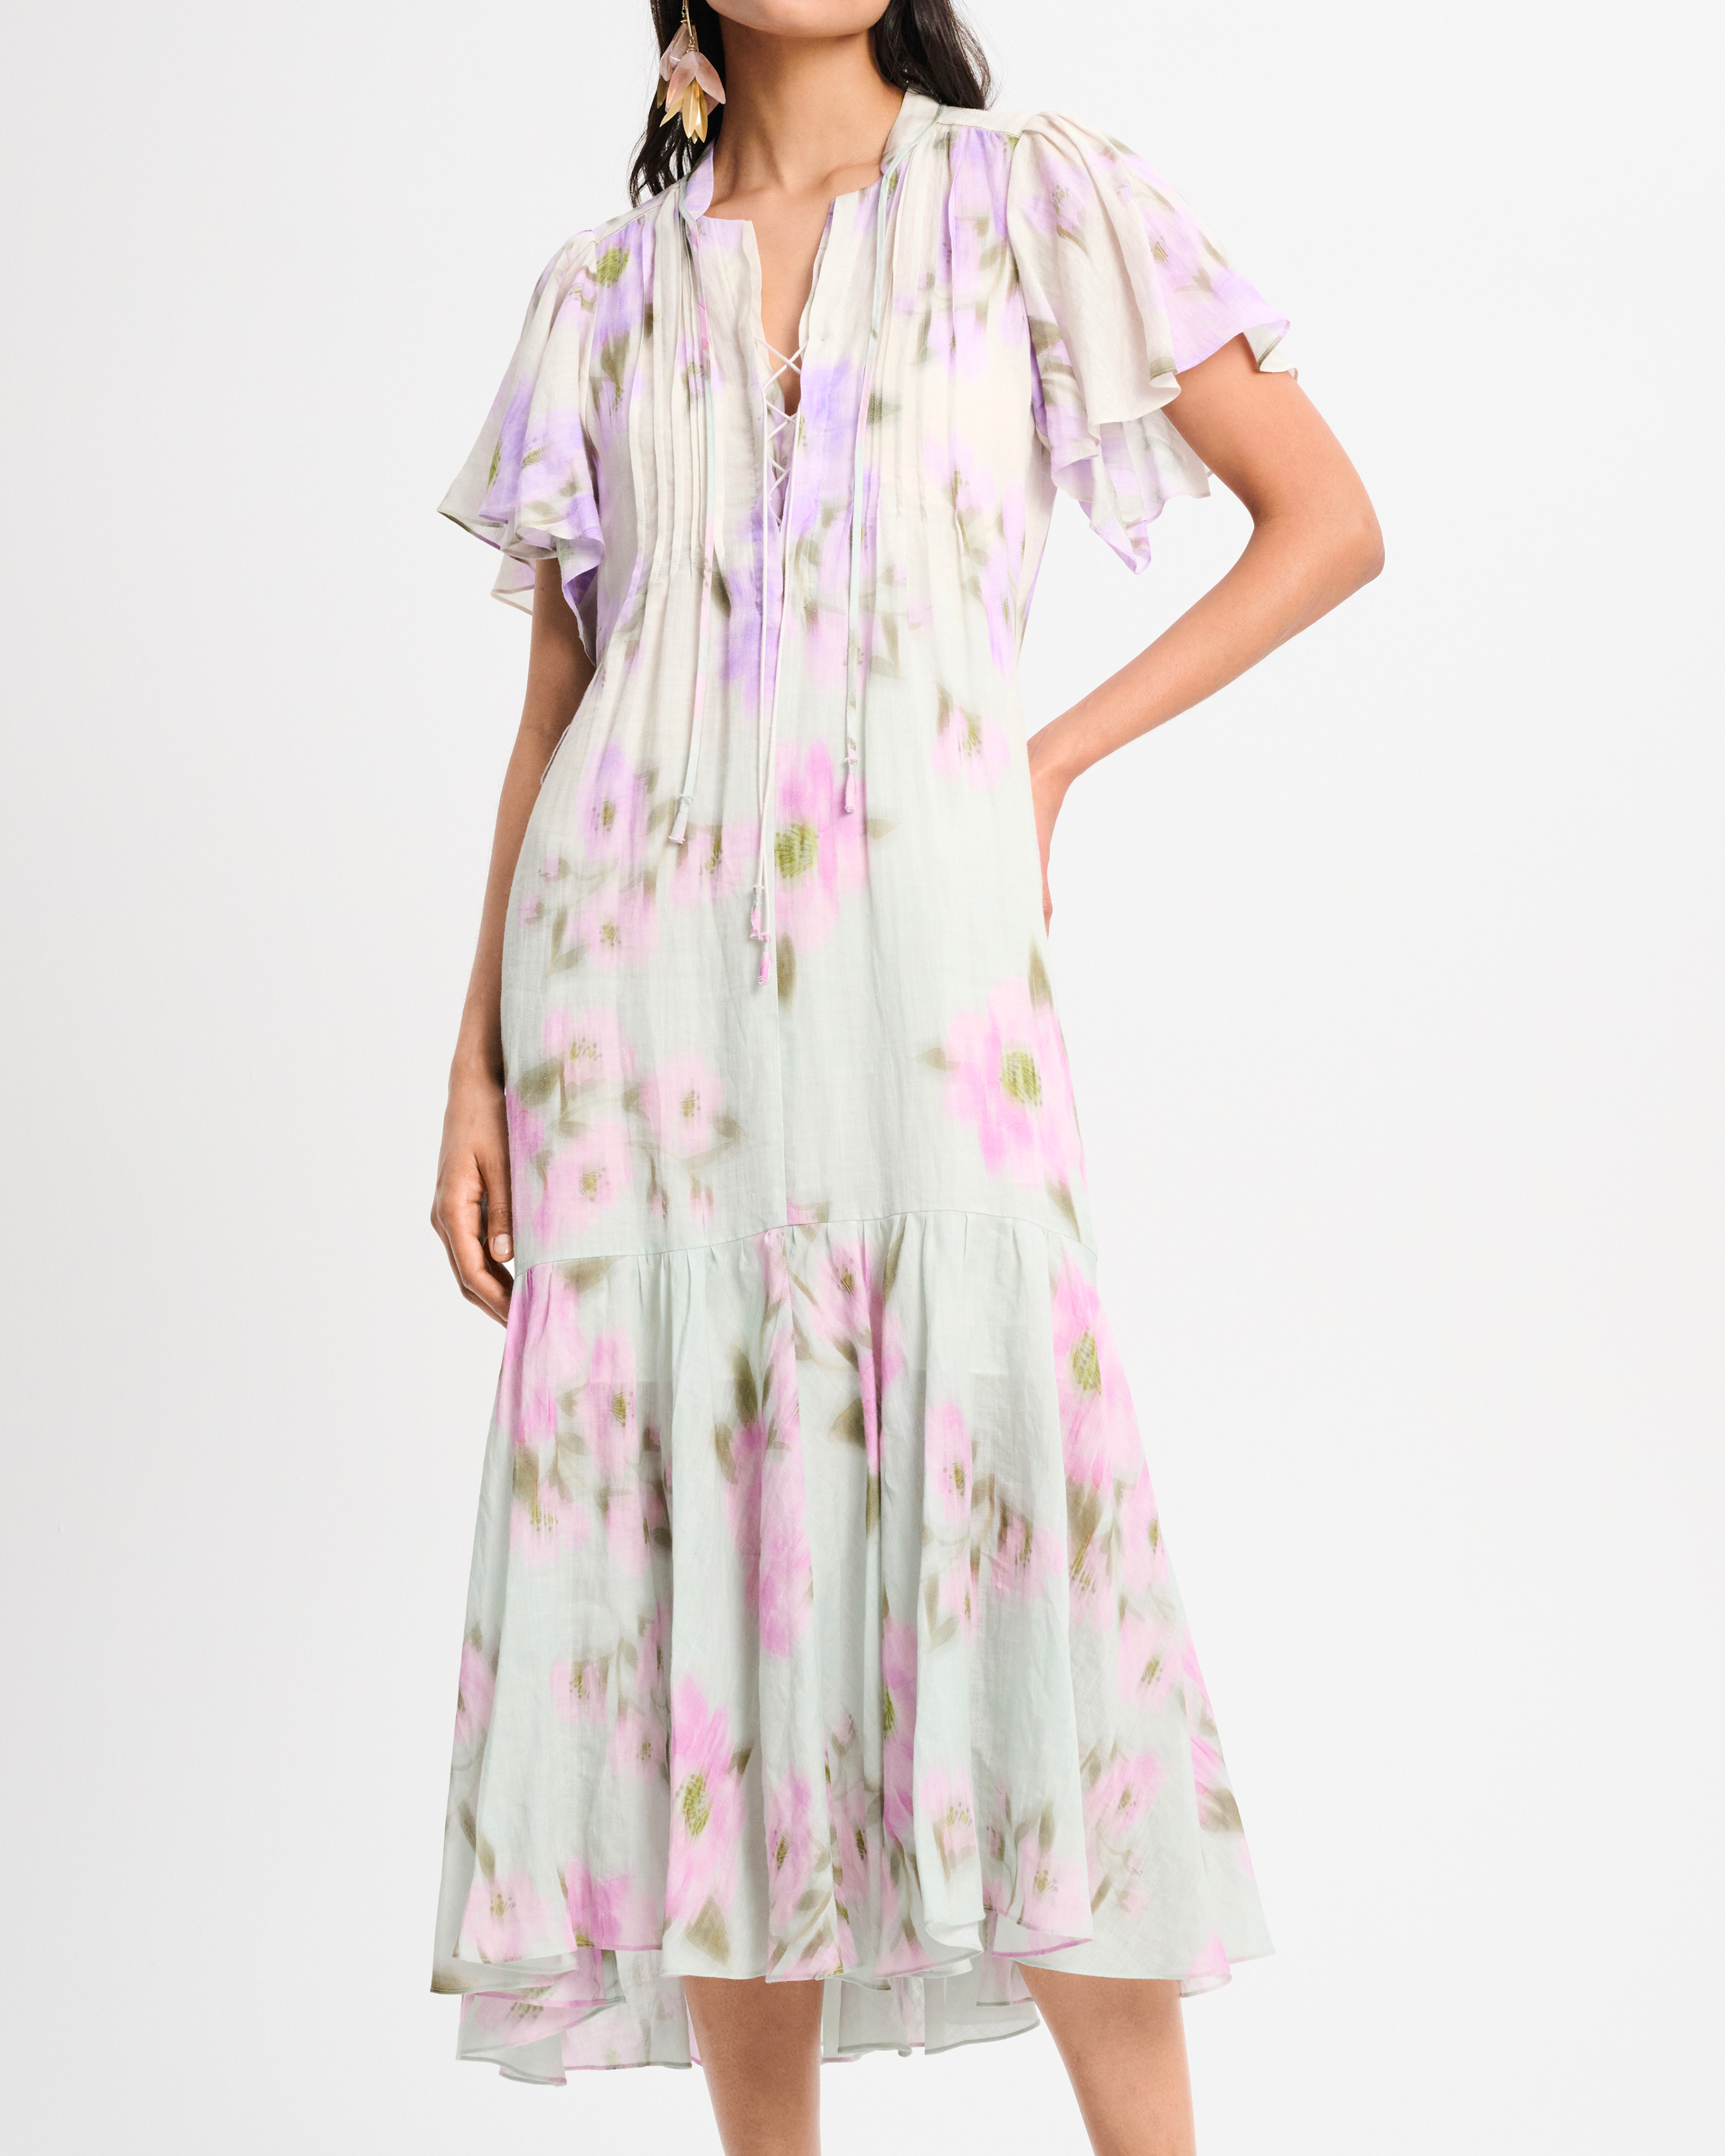 Dorothee Schumacher Blooming Volumes Dress in Cotton Candy